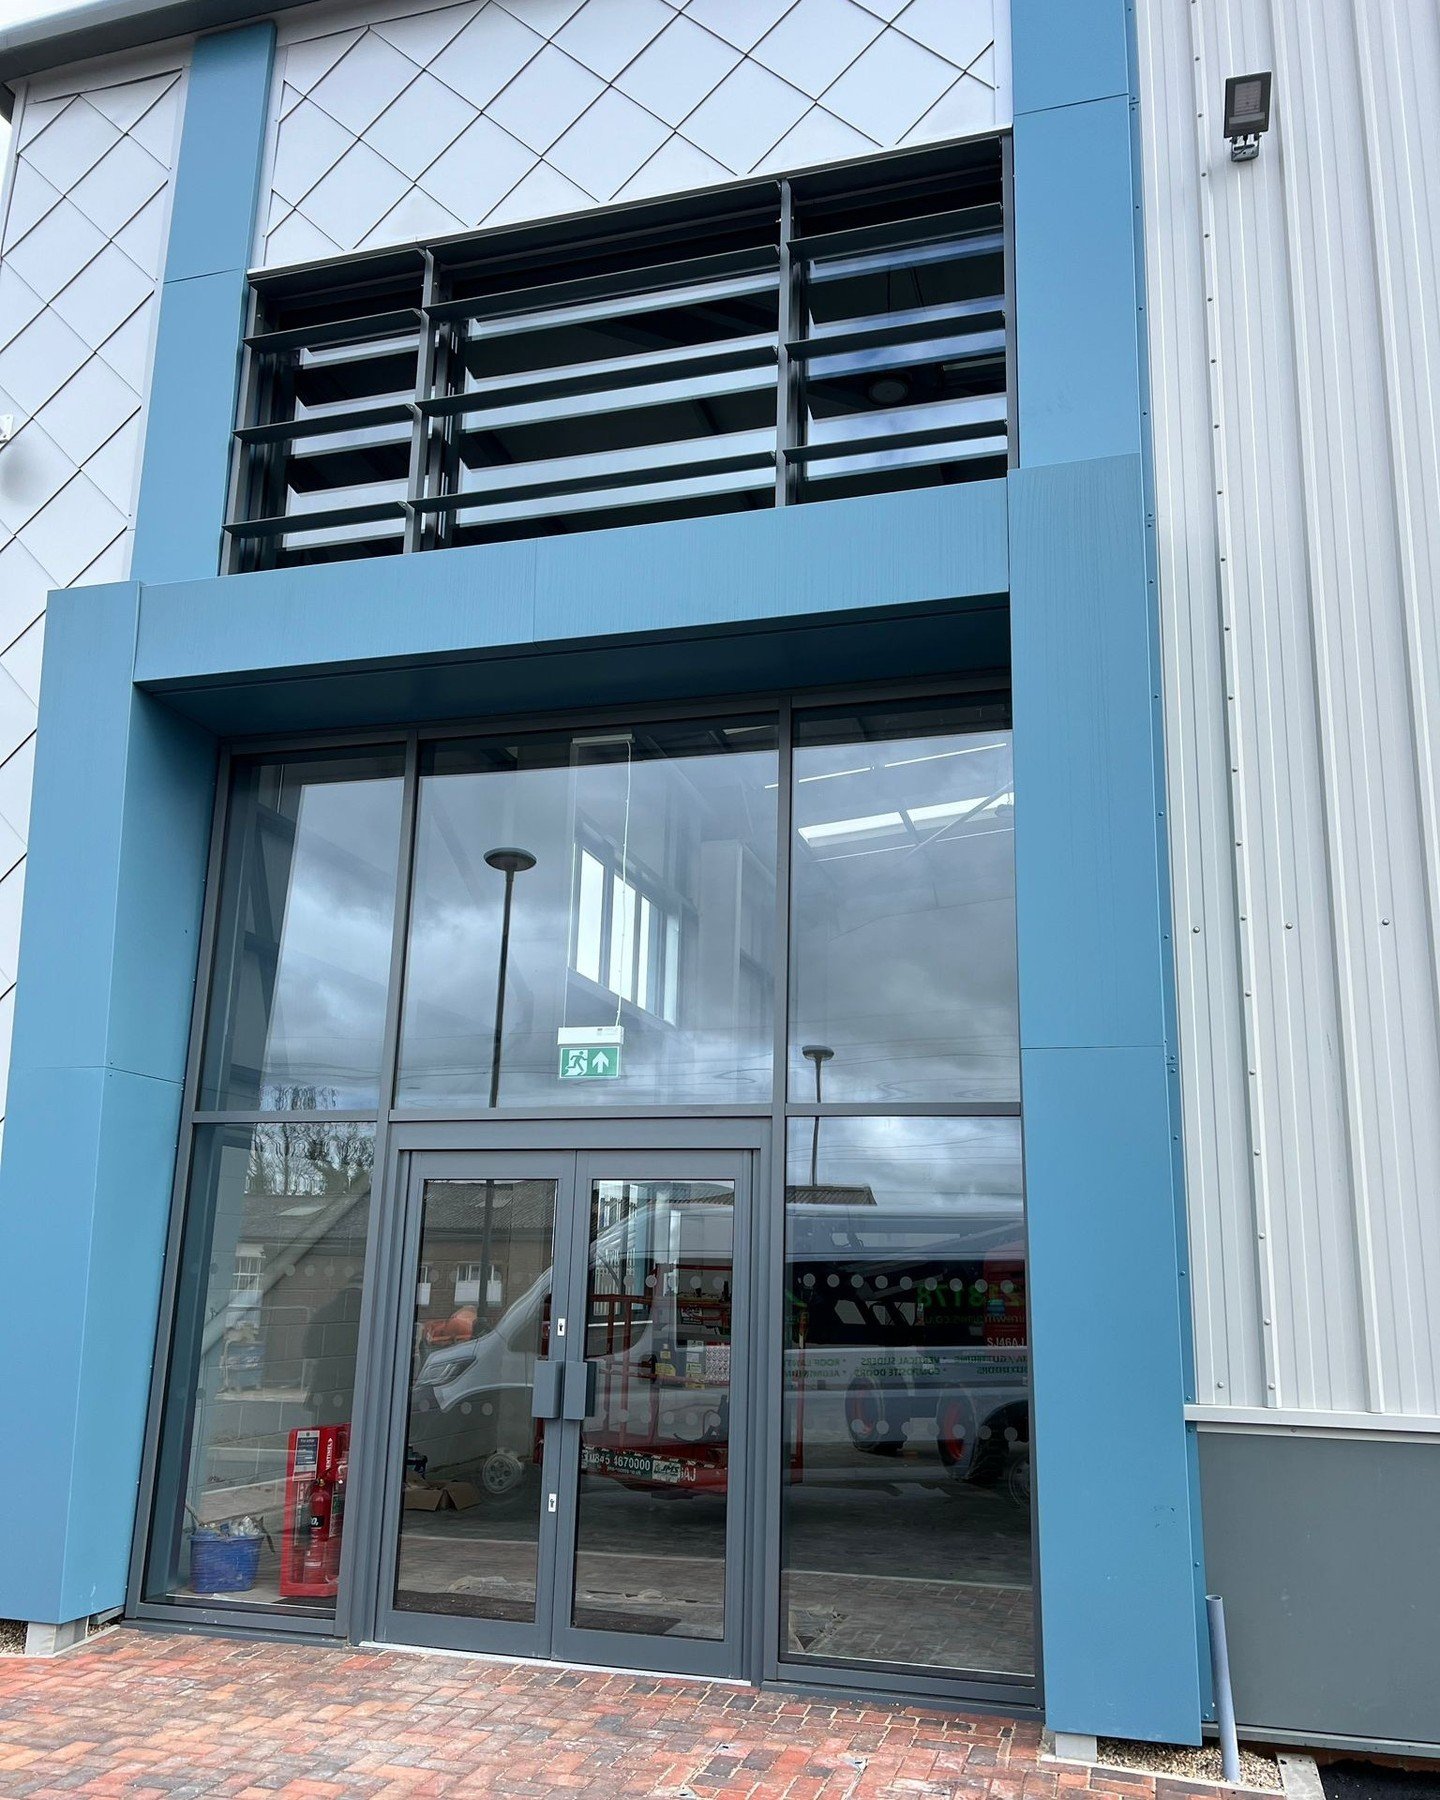 Are you looking for curtain walling and new doors for your business?

At Bedfordshire Windows, we manufacture a diverse range of high-quality commercial glazing systems for a range of sectors.

Want to know more? Give us a call on 01234 218178 or vis